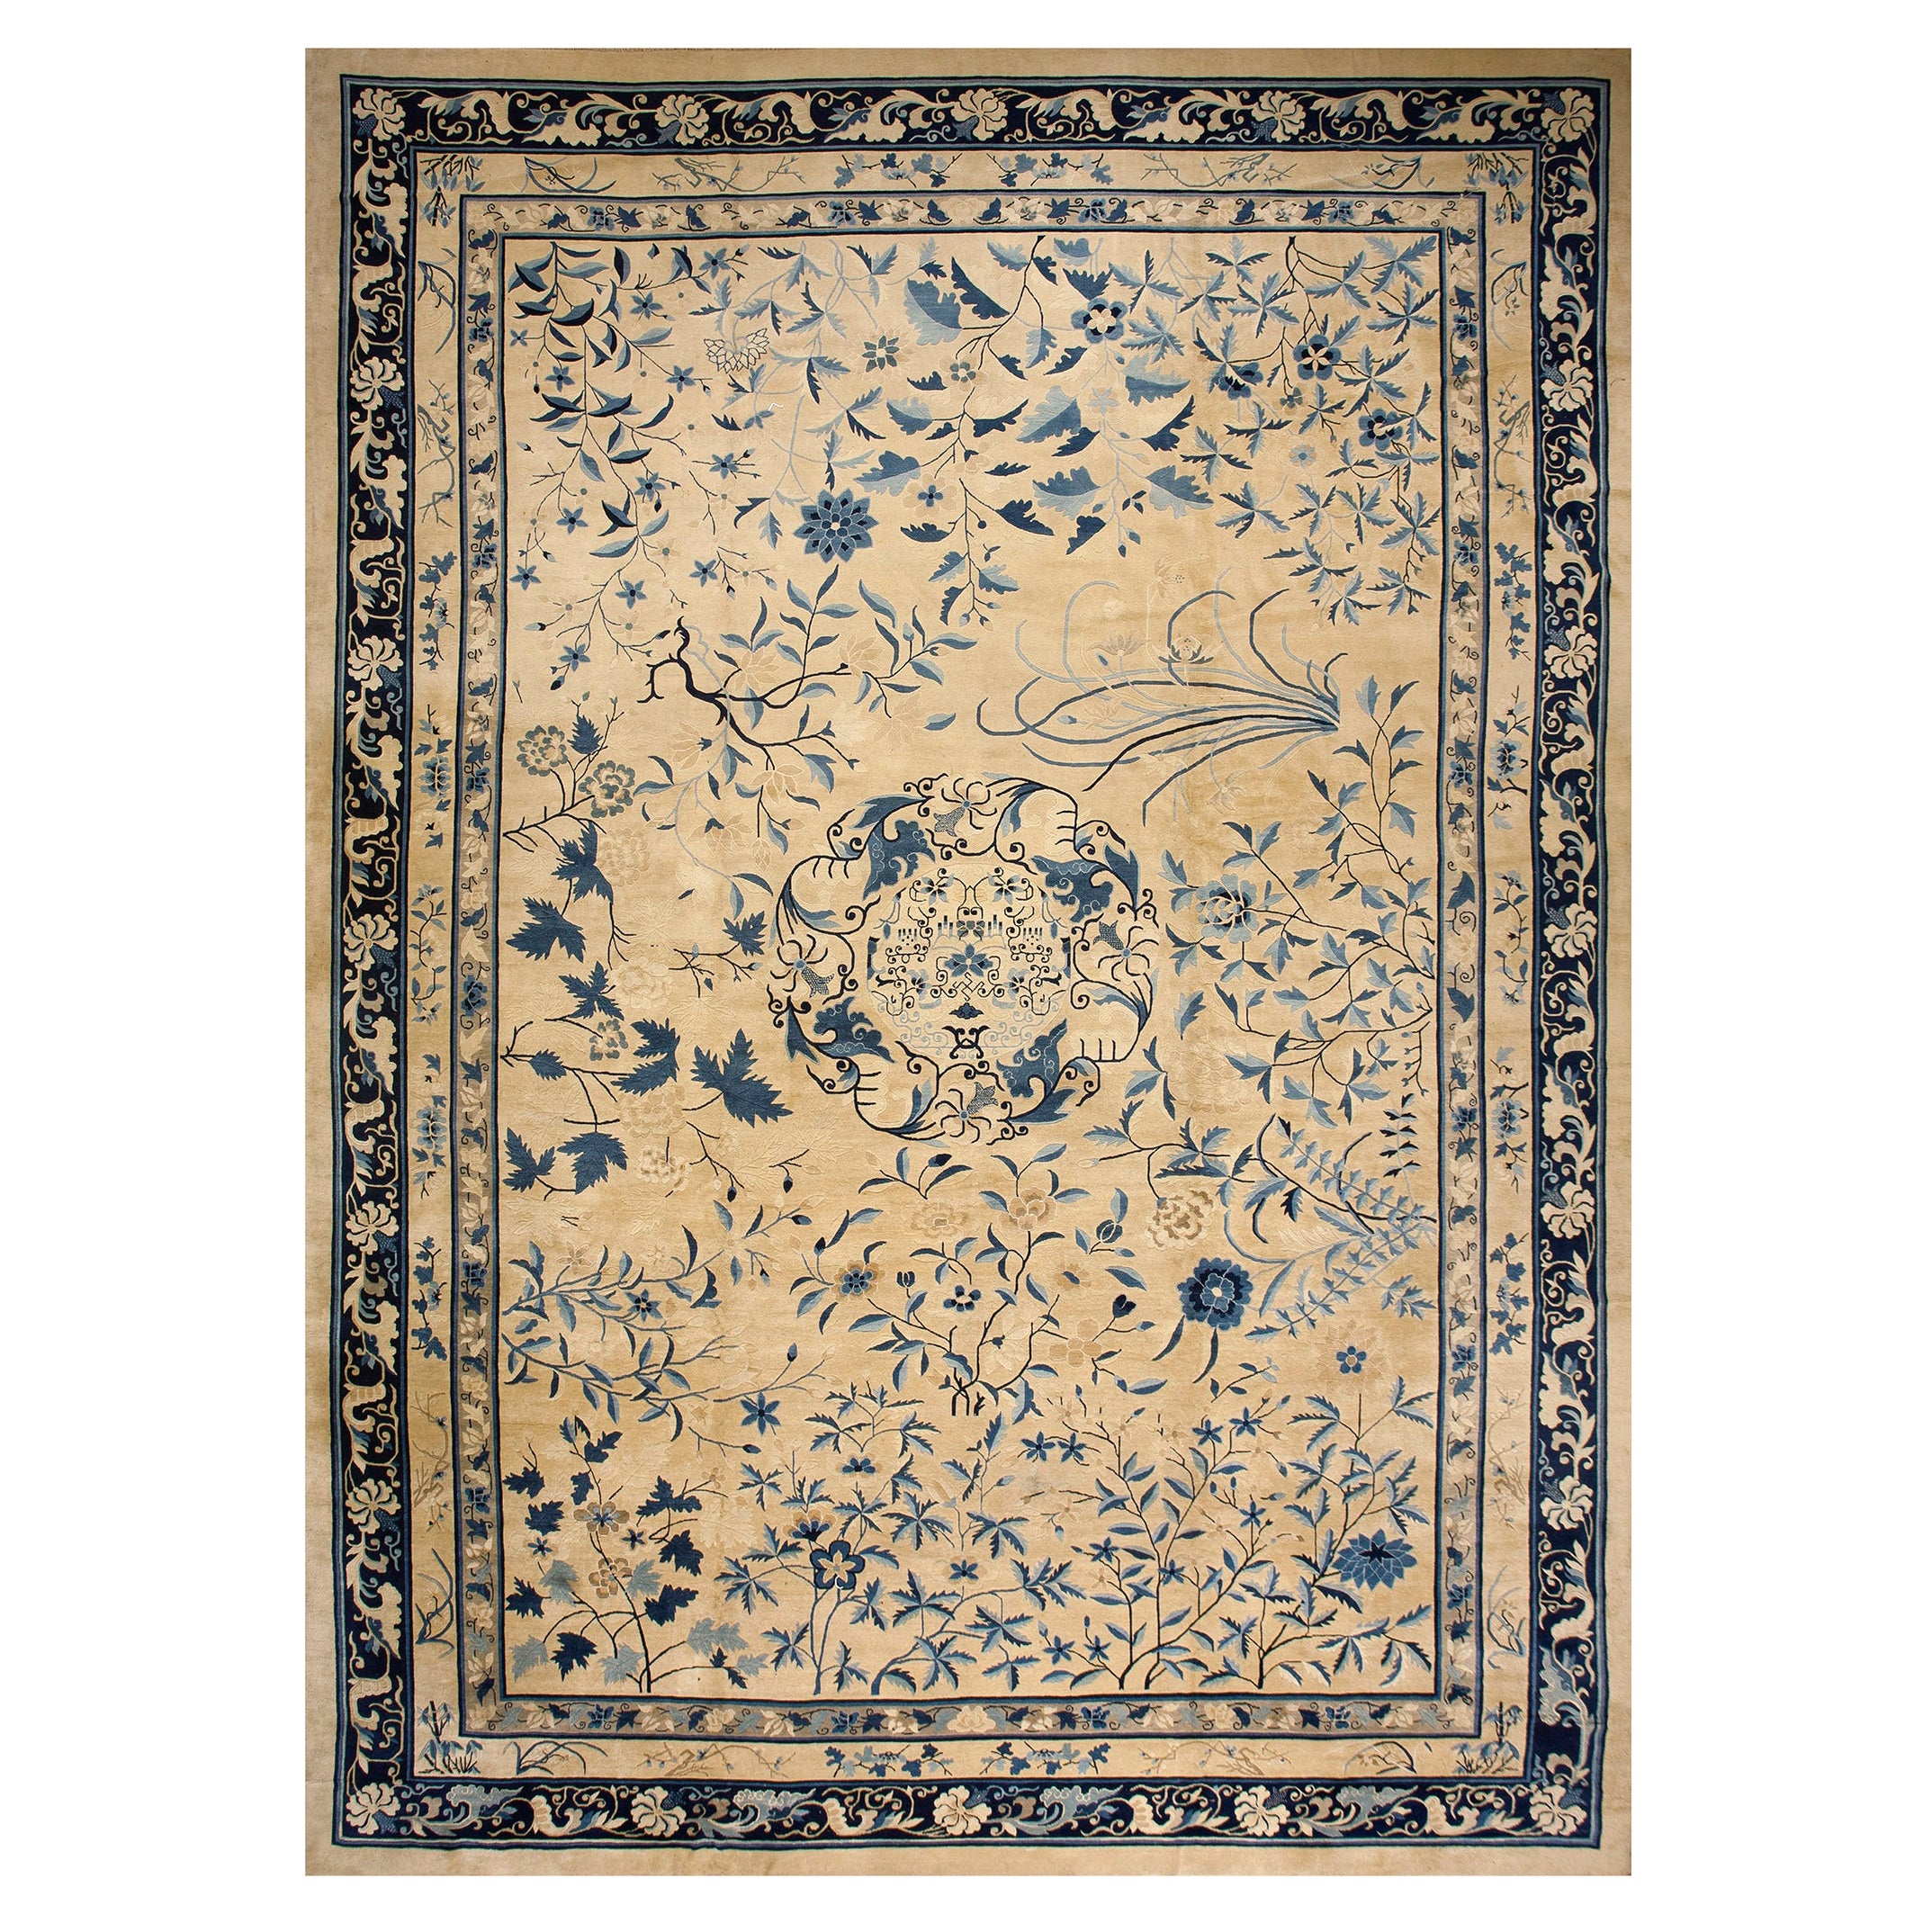 Late 19th Century Chinese Peking Carpet ( 13' 9" x 19' 5" - 420 x 592 cm ) For Sale